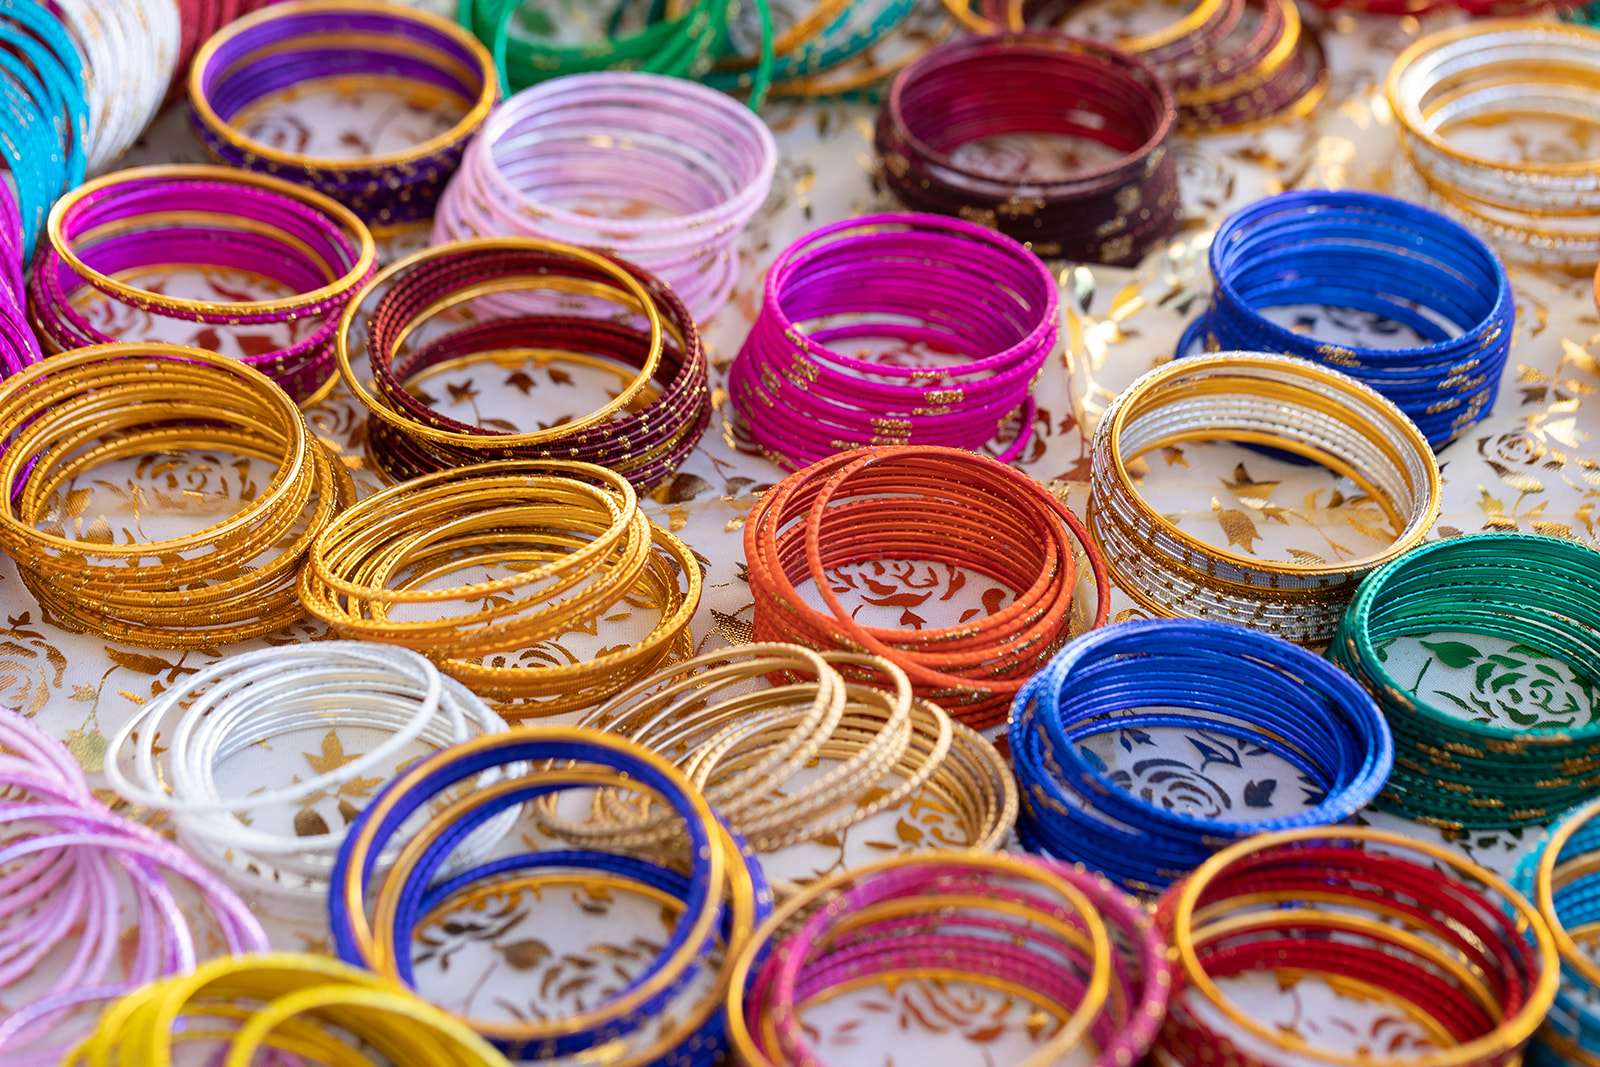 Bracelets used for an Indian wedding.